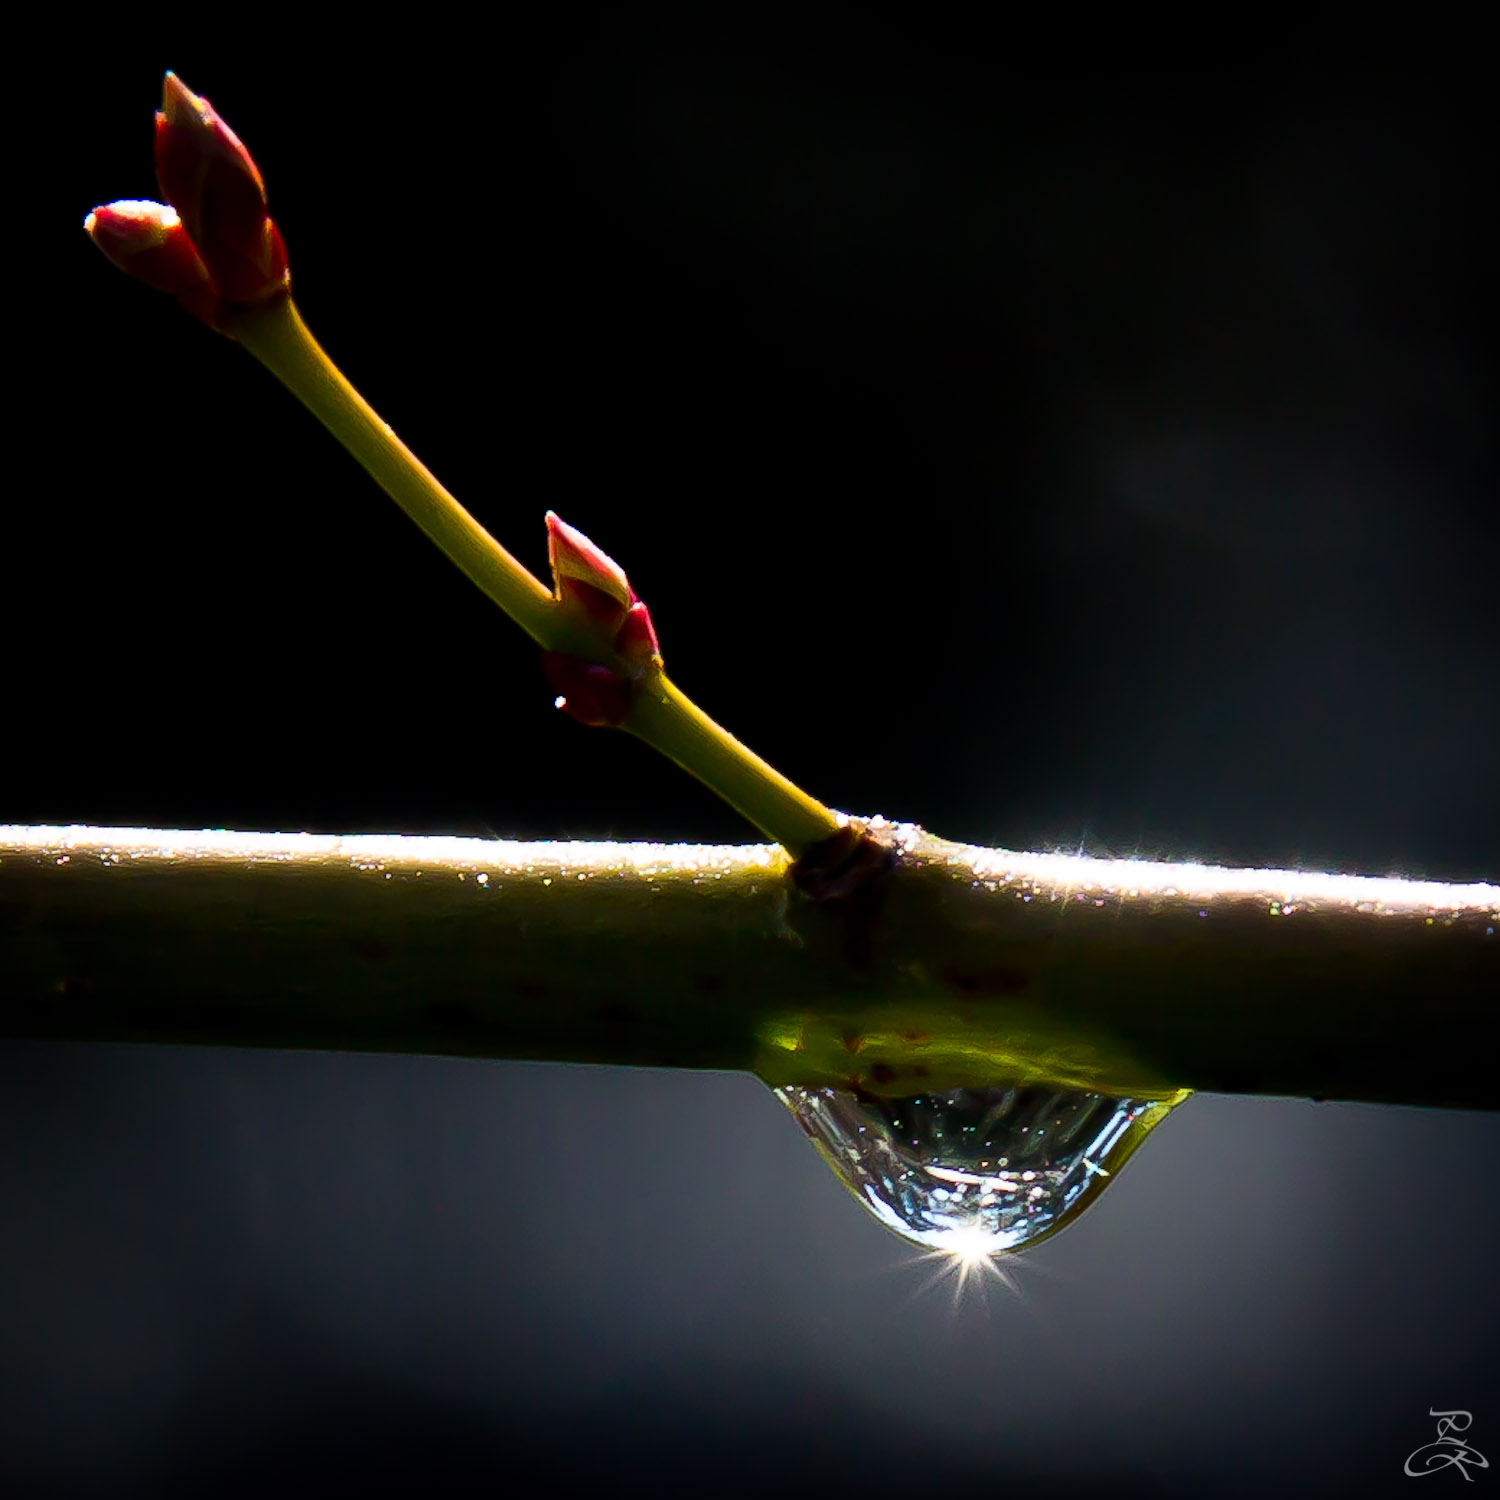 World in a drop of dew, Kyoto, Japan